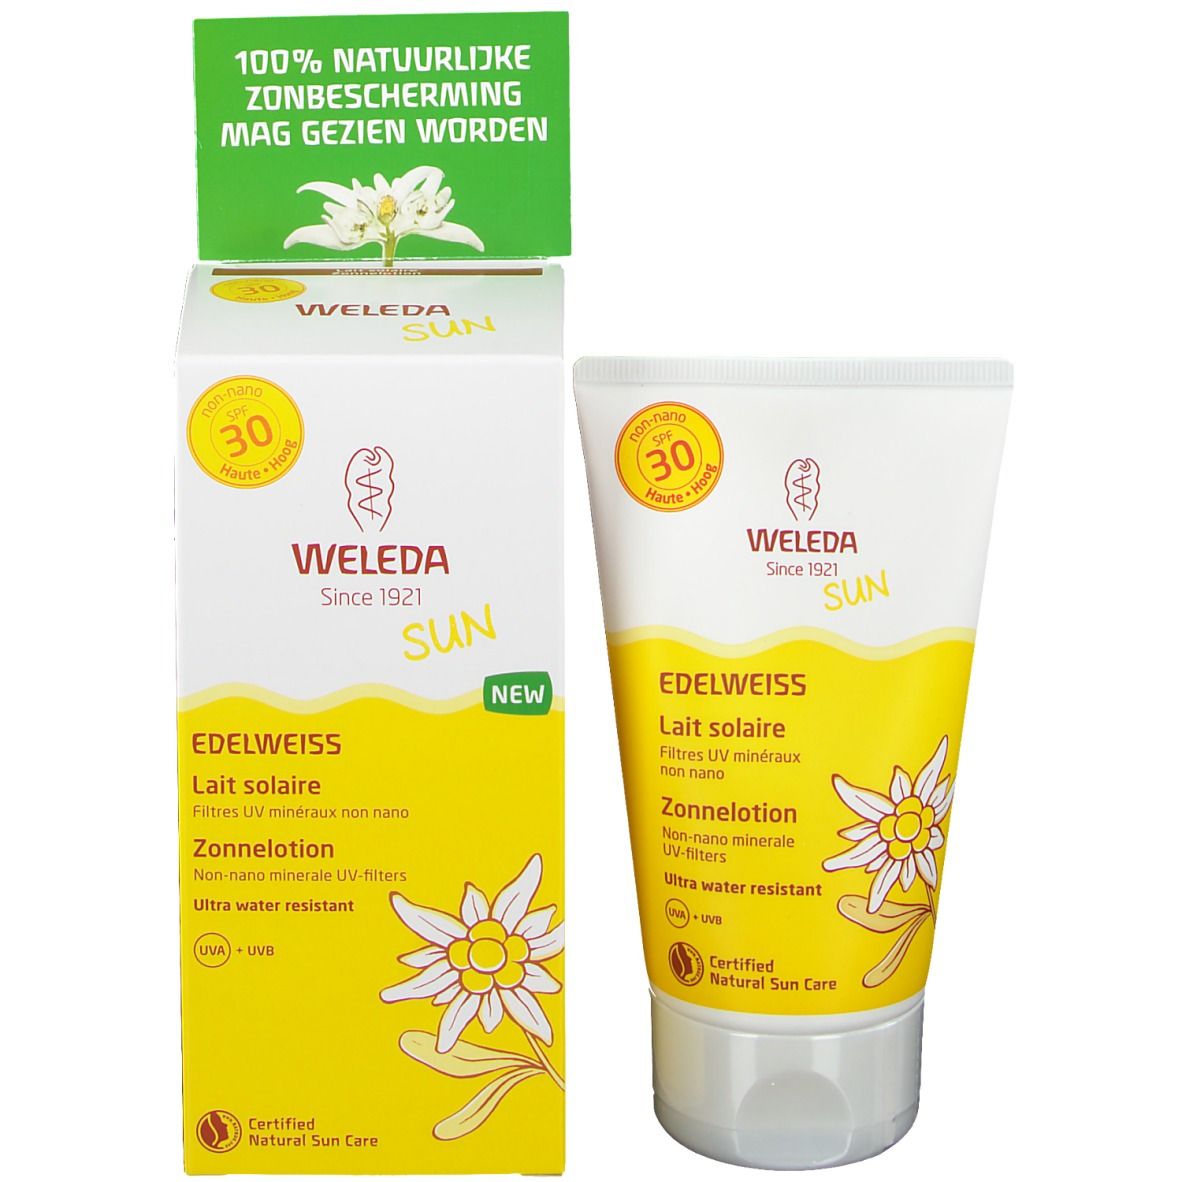 Weleda Sun Edelweiss Lait Solaire SPF30